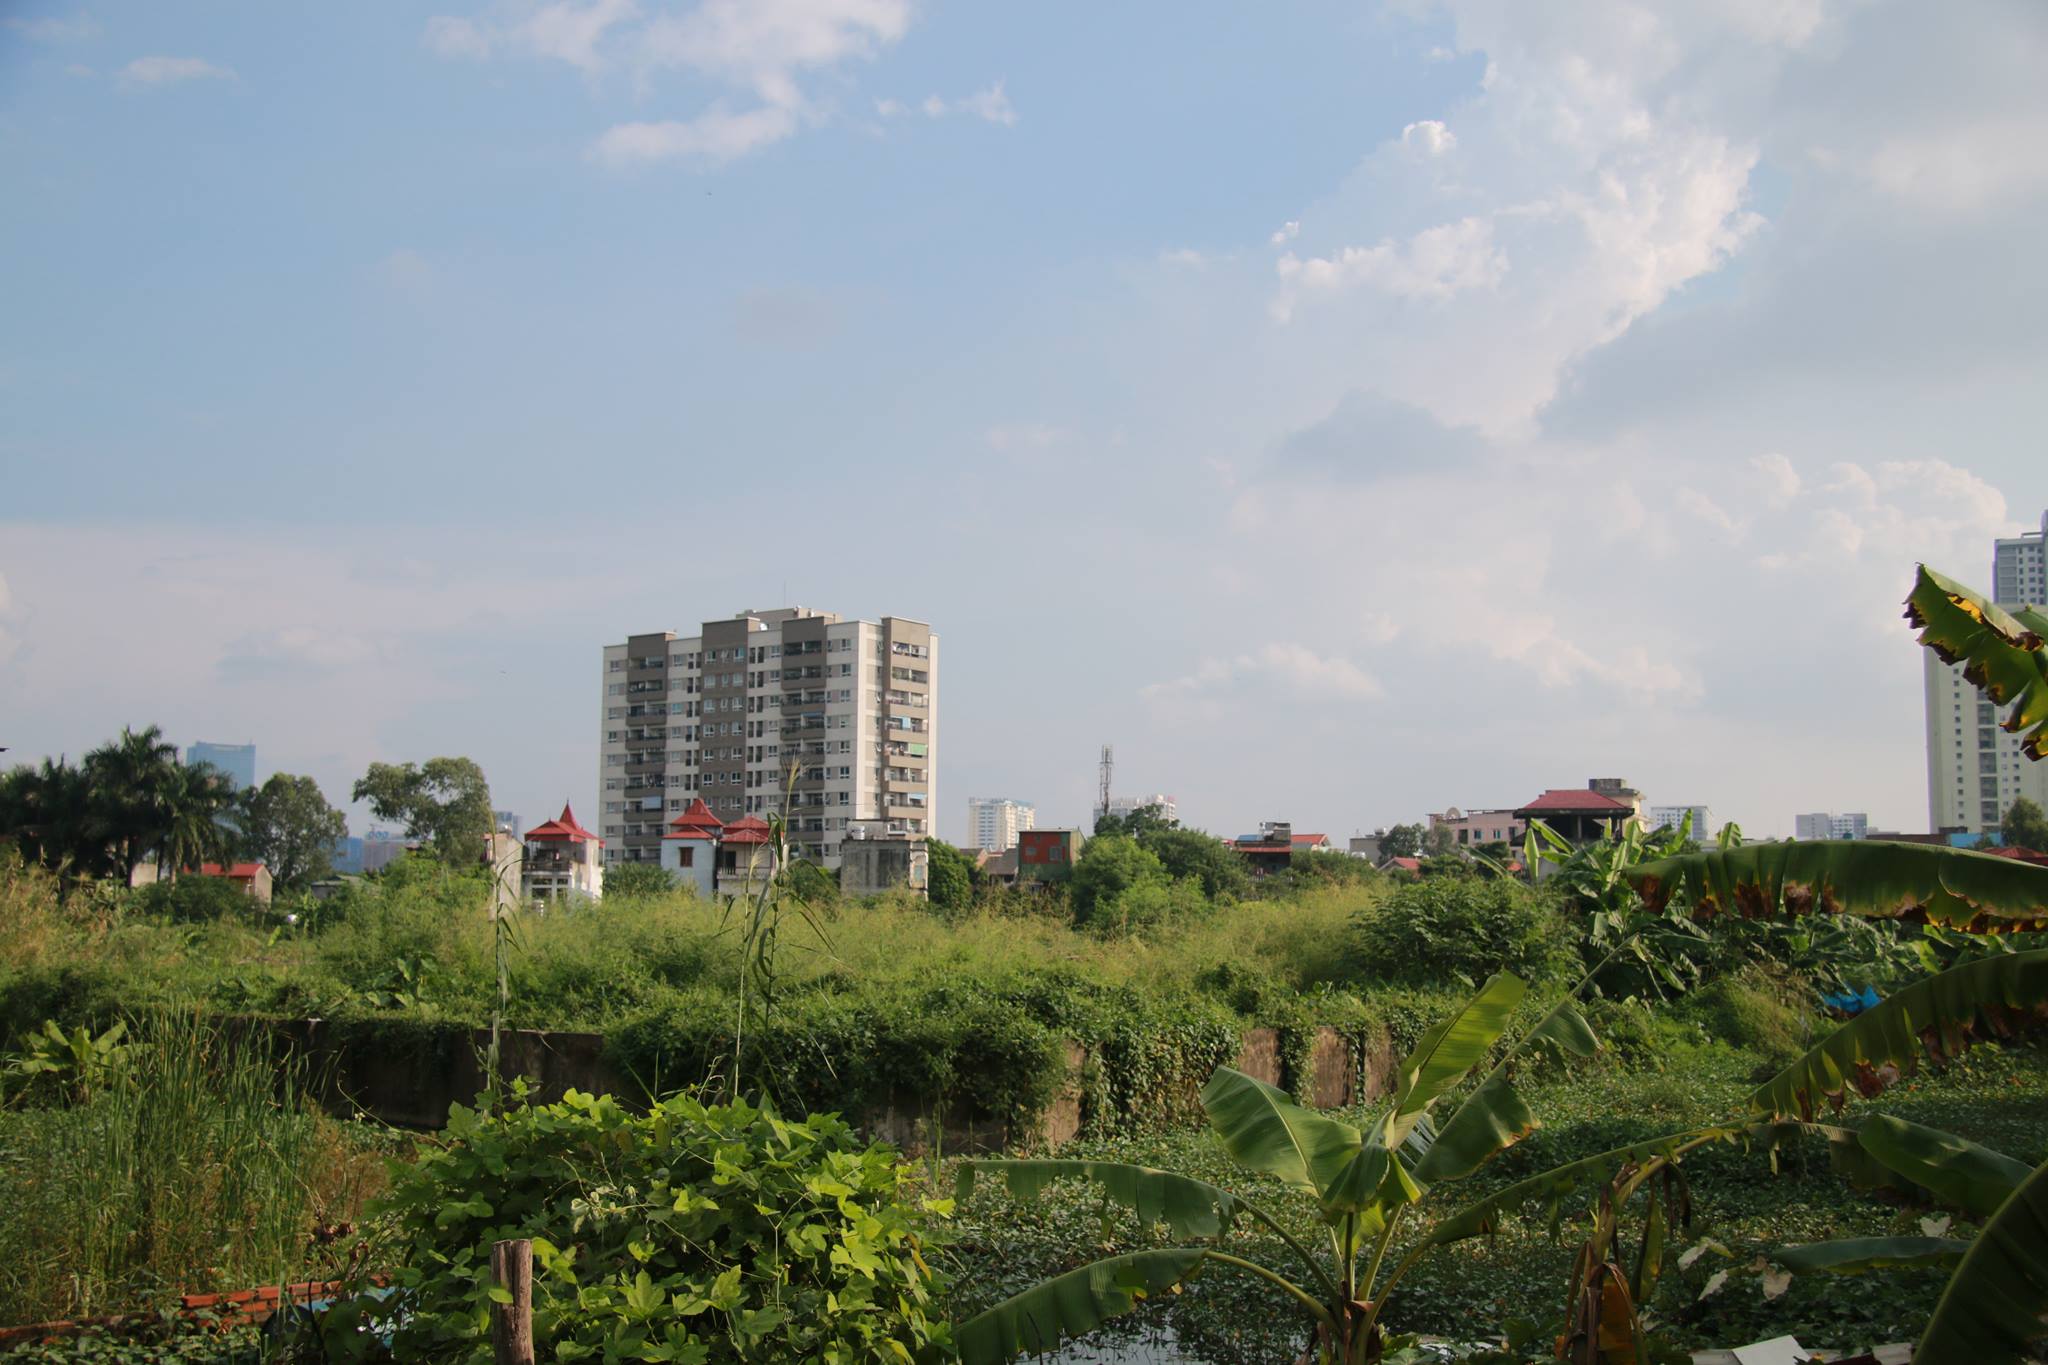 The land where the B5 Cau Dien project is expected to be built on is now filled with grass and trees. Photo: Tuoi Tre